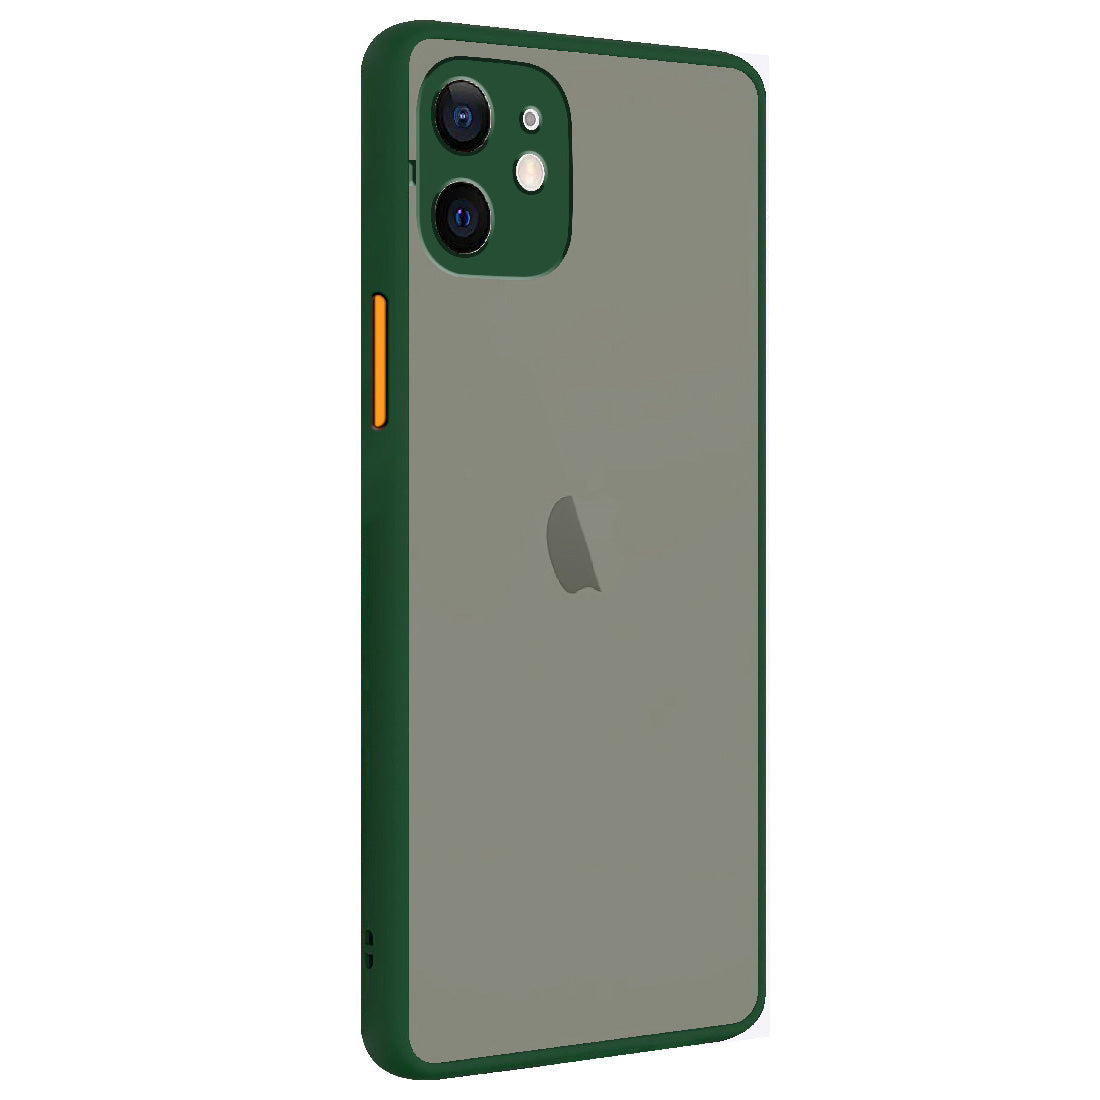 Smoke Back Case Cover for Apple iPhone 12